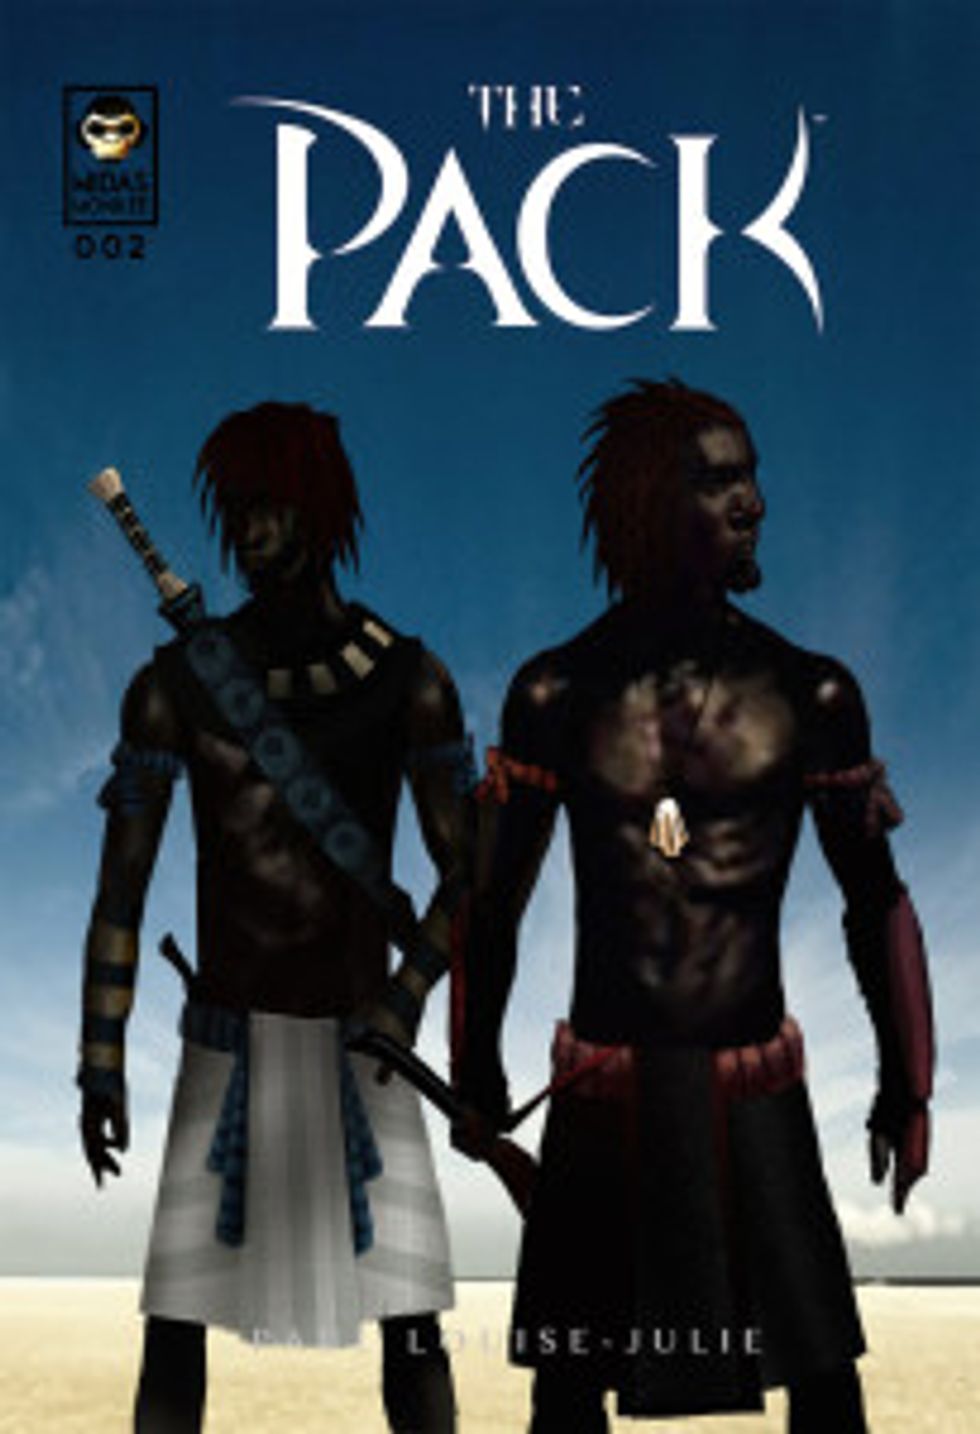 African Mythology Comic Series 'The Pack' Returns With Issue 2 Of Its Egyptian Saga